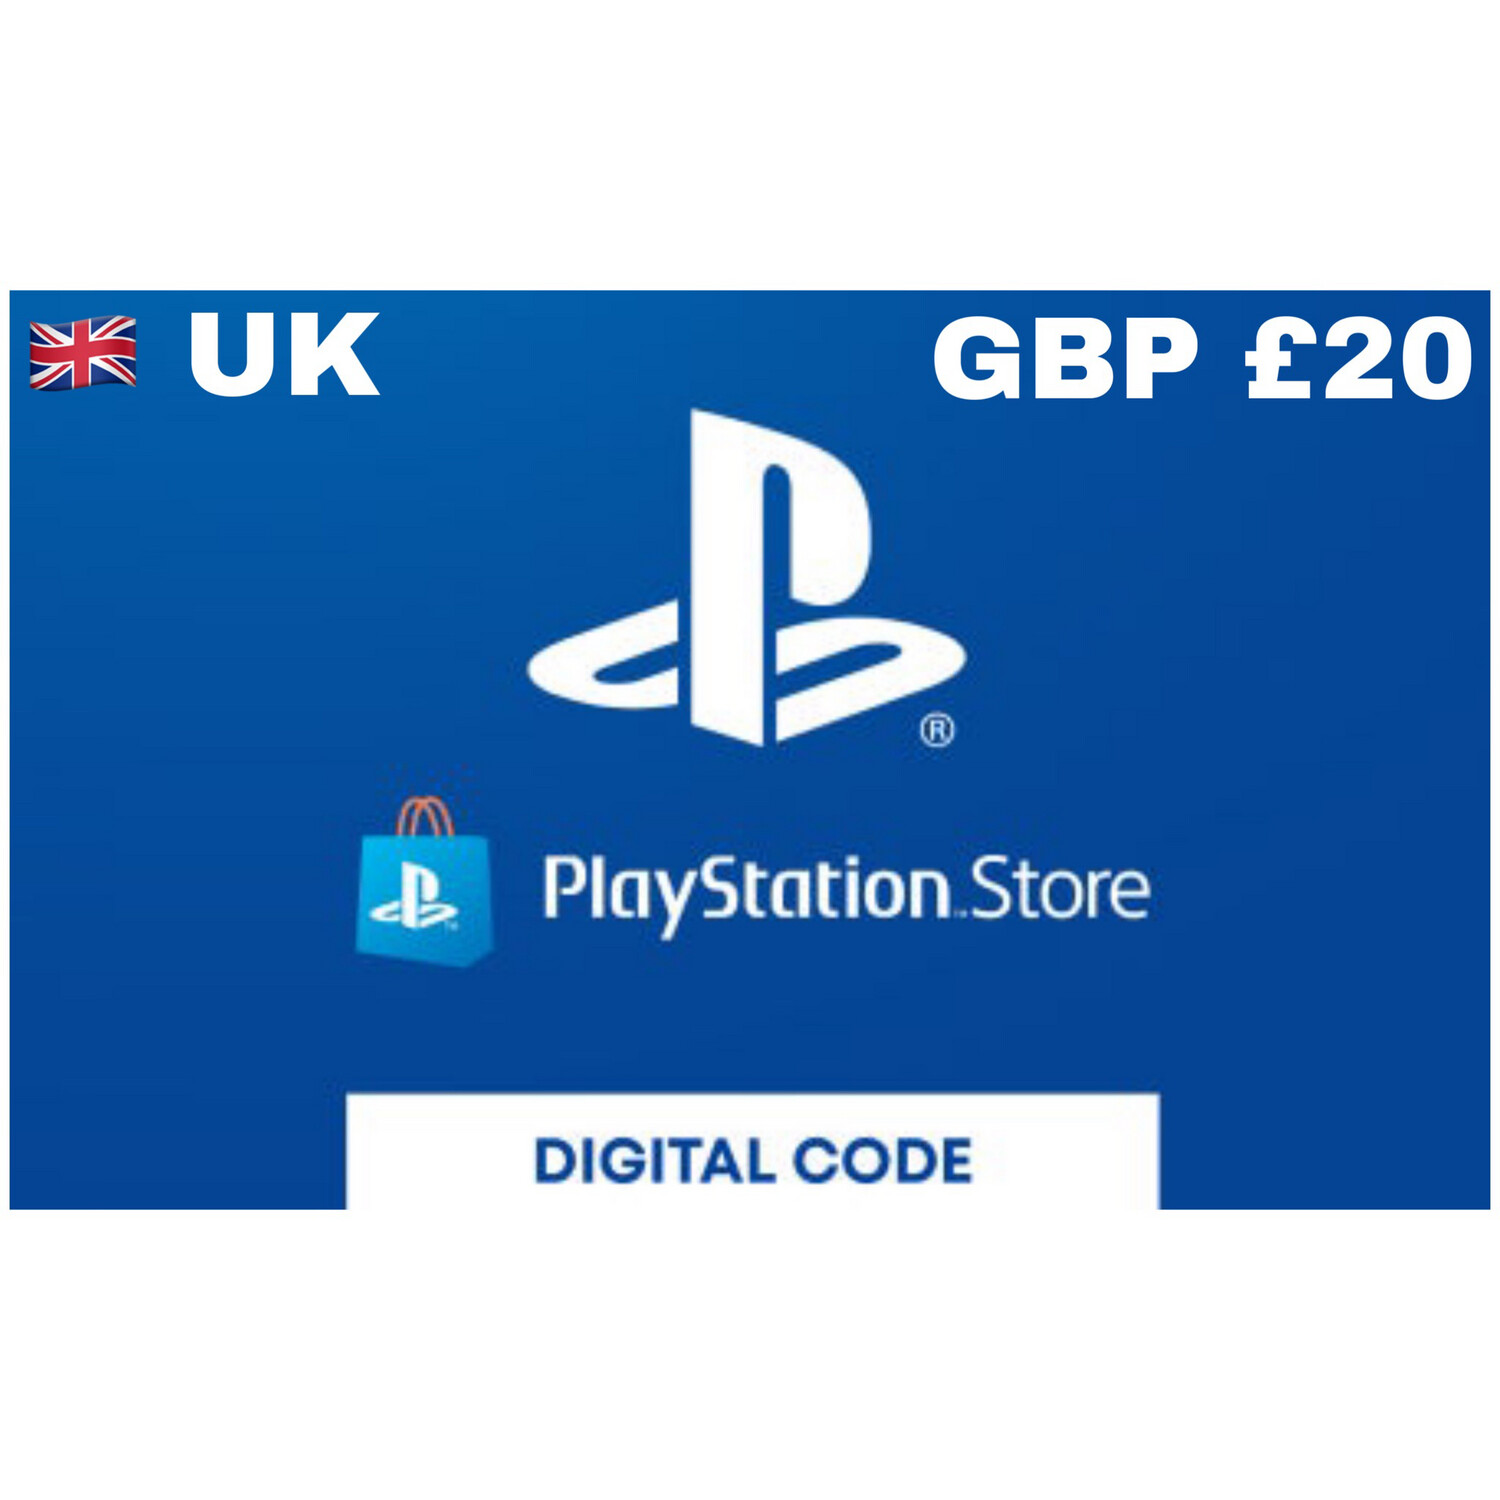 Playstation Store Gift Card UK GBP £20